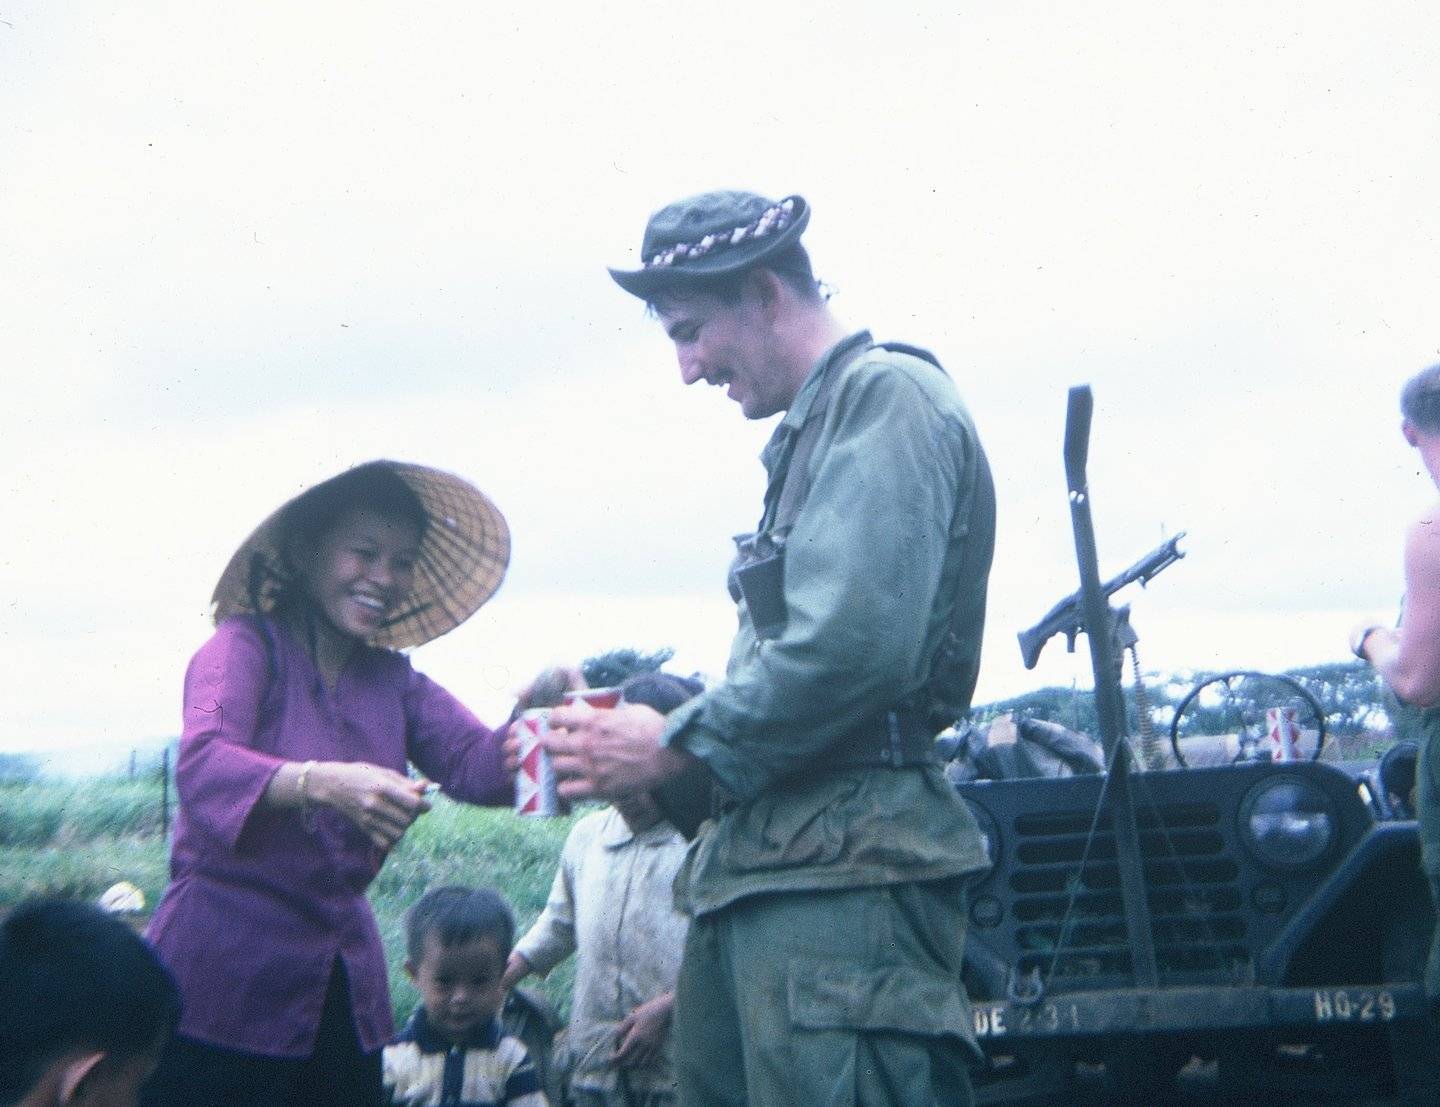 U.S. soldier handing out sodas to smiling Asian villagers.